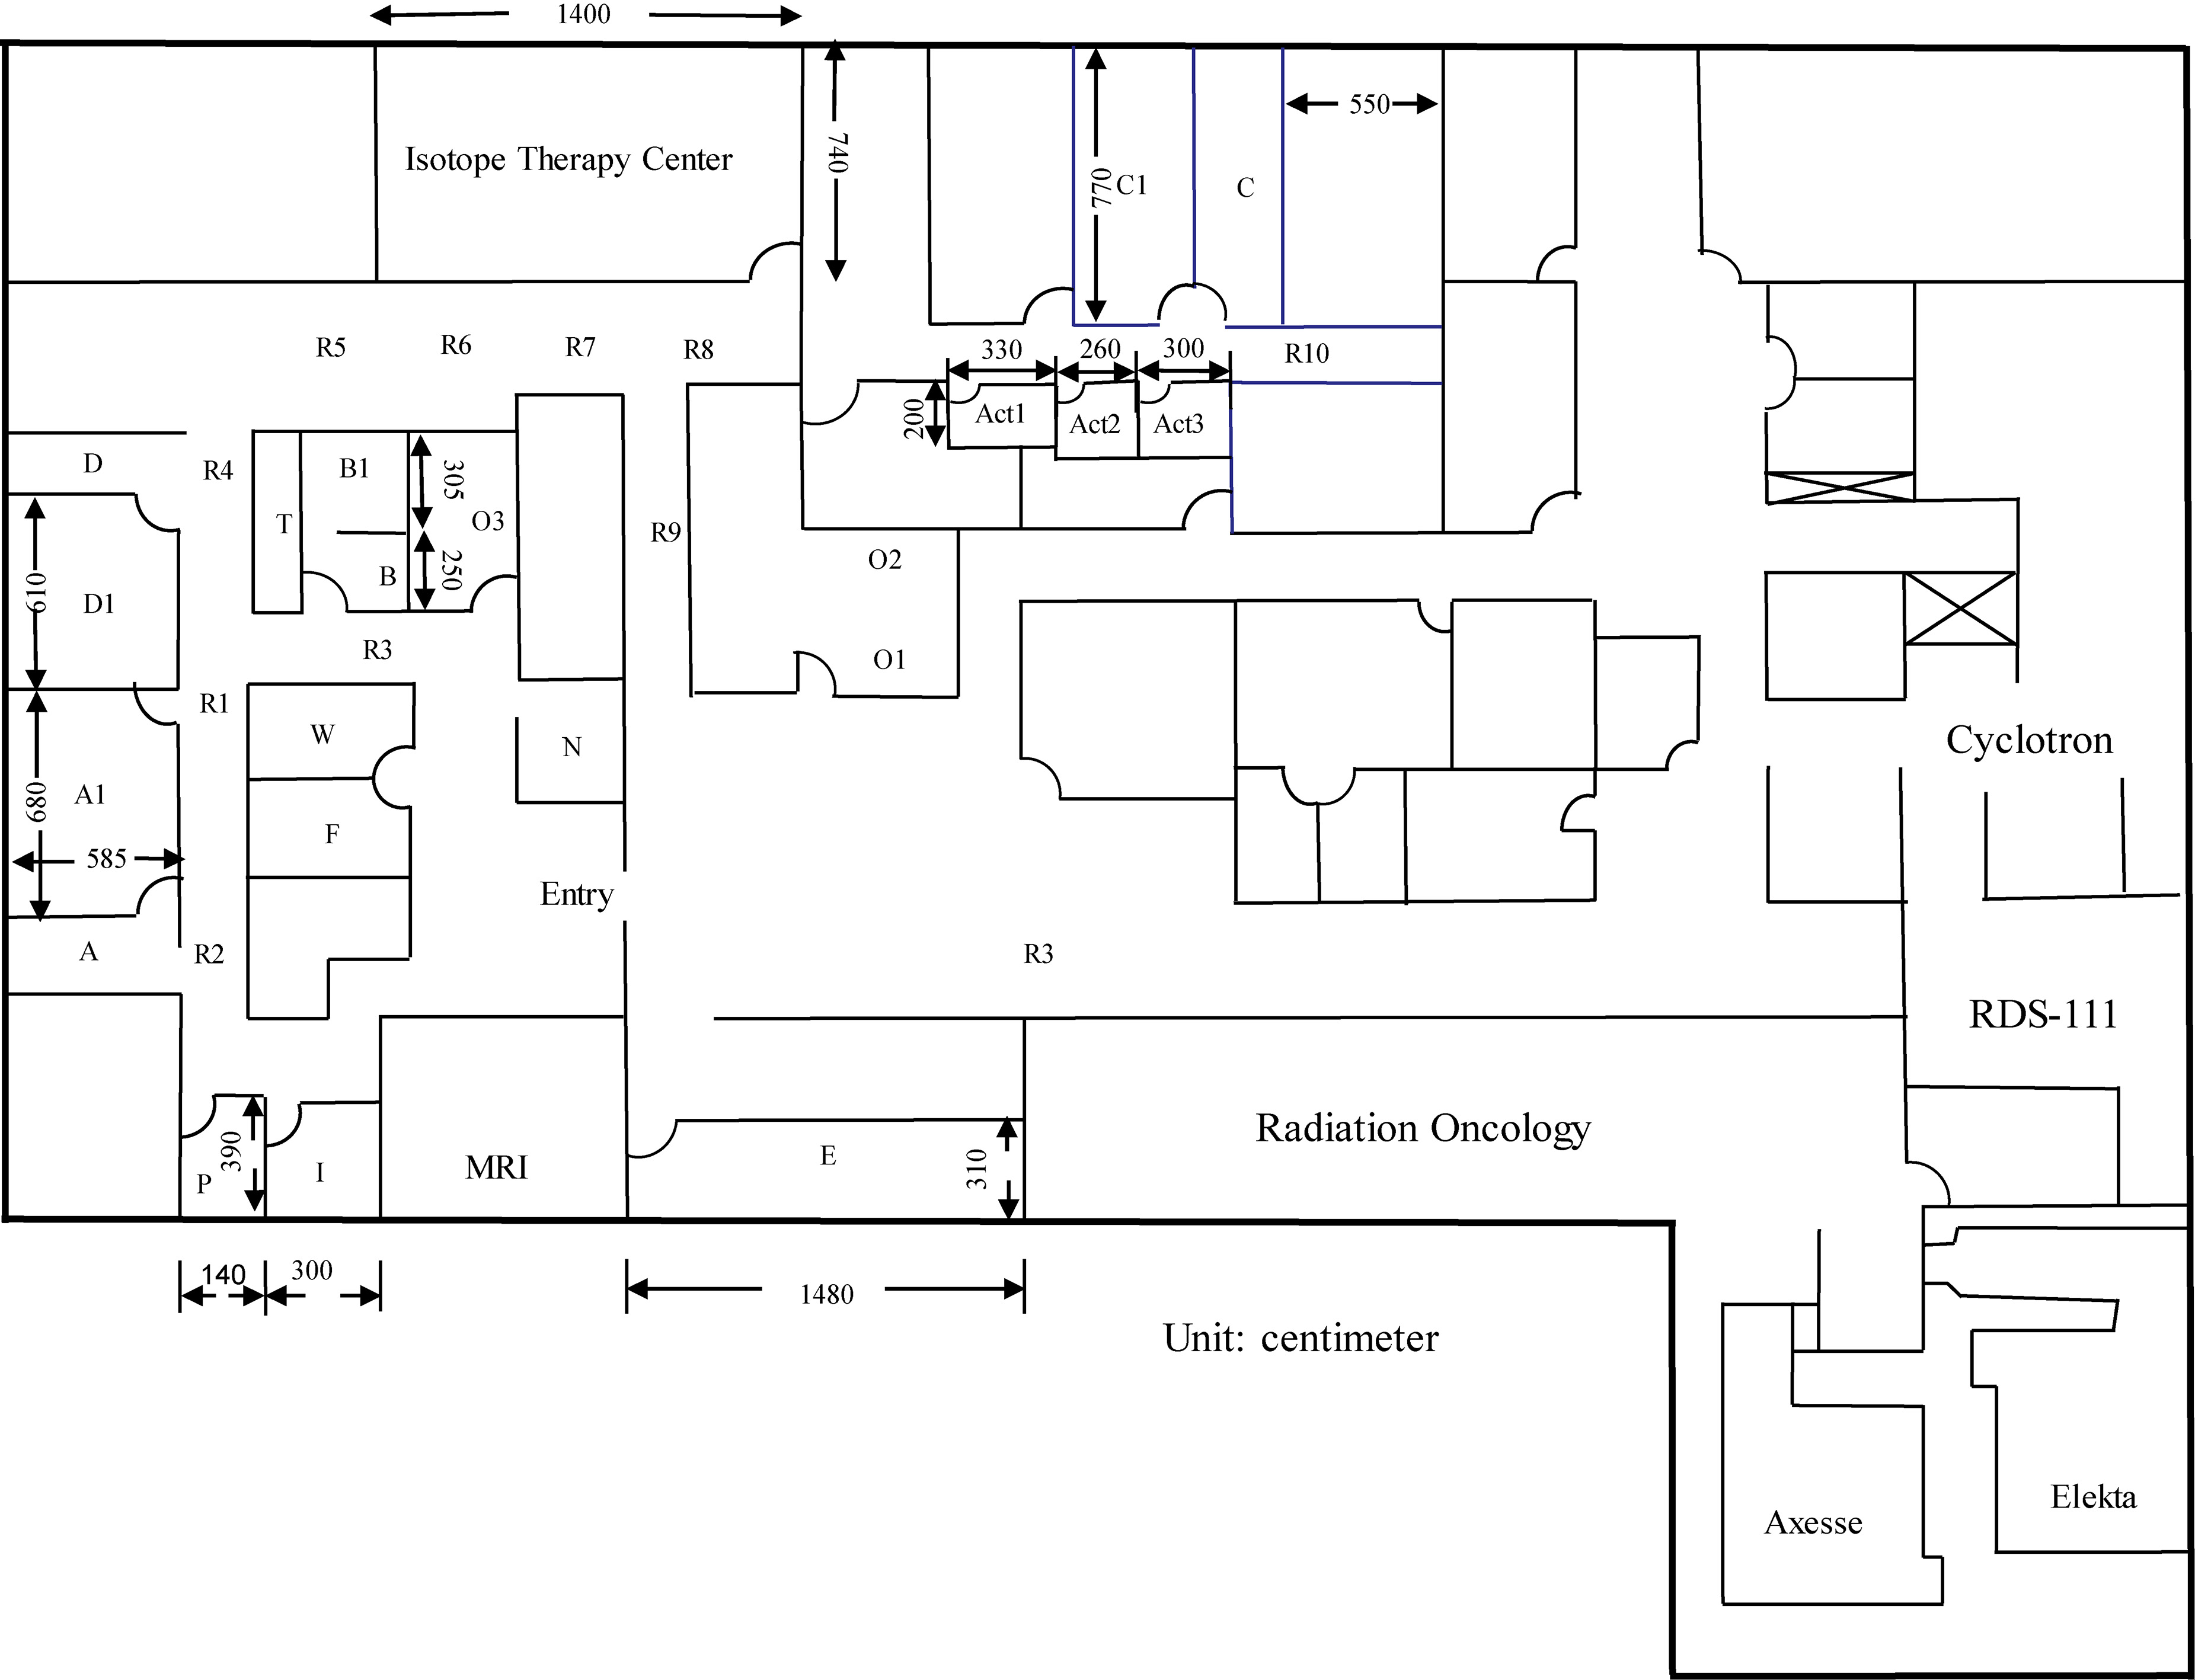 A layout of basement 1 of at CSMUH, which was included the NM, RO and cyclotron. These locations were labeled with letters from A to T where TLDs were placed. Each point was selected based on its occupation by workers and general individuals. TLDs were suspended at SPECT, DXA, PET/CT and SPECT/CT control rooms (A, B, C, and D) on the walls at one meter height above the floor. In addition, TLDs were tapped at the ceiling directly “O” ring above the scanner in the imaging room (A1, B1, C1, and D1).